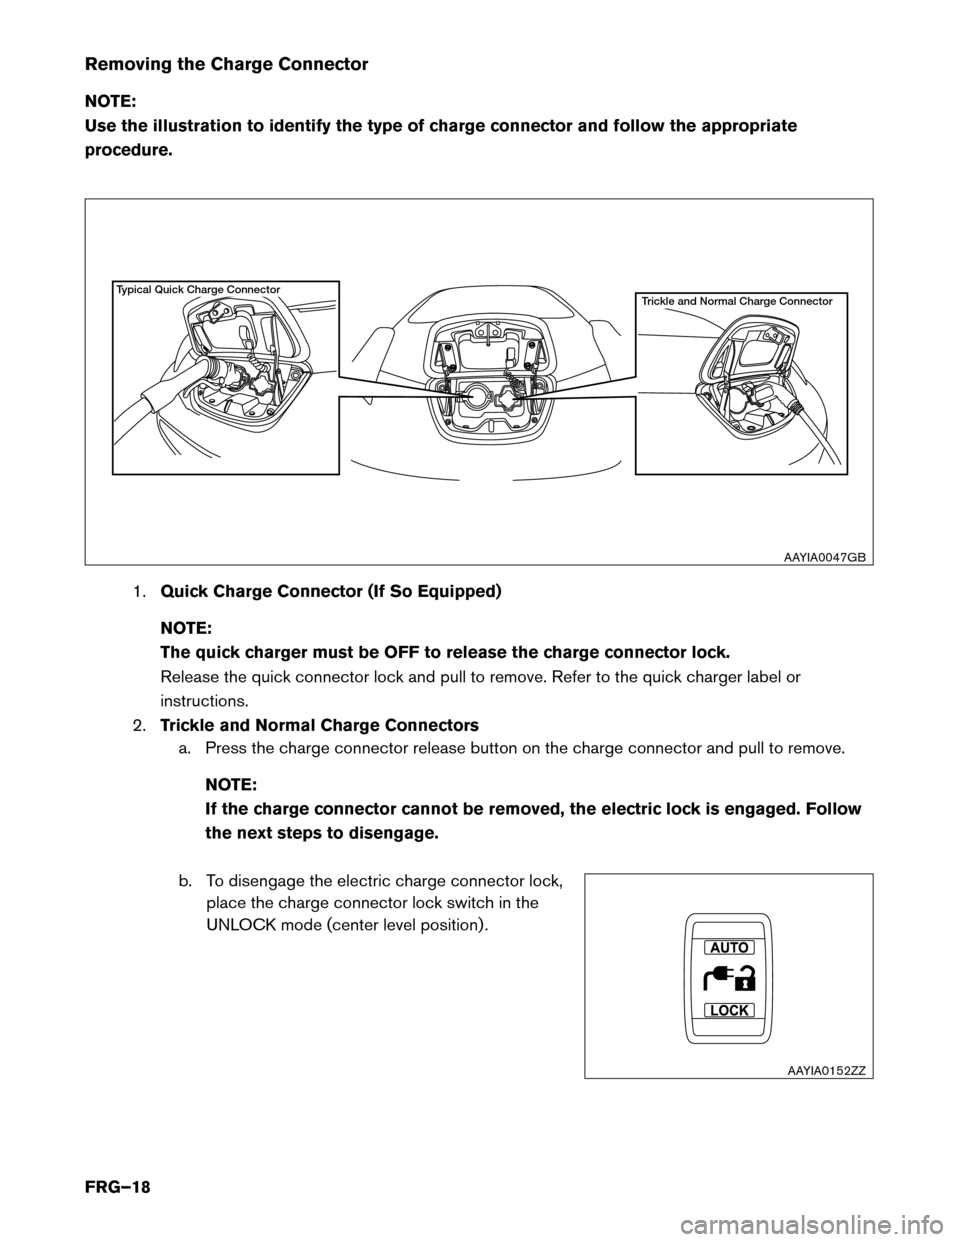 NISSAN LEAF 2014 1.G First Responders Guide Removing the Charge Connector
NO
TE:
Use the illustration to identify the type of charge connector and follow the appropriate
procedure.
1.Quick Charge Connector (If So Equipped)
NOTE:
The quick charg